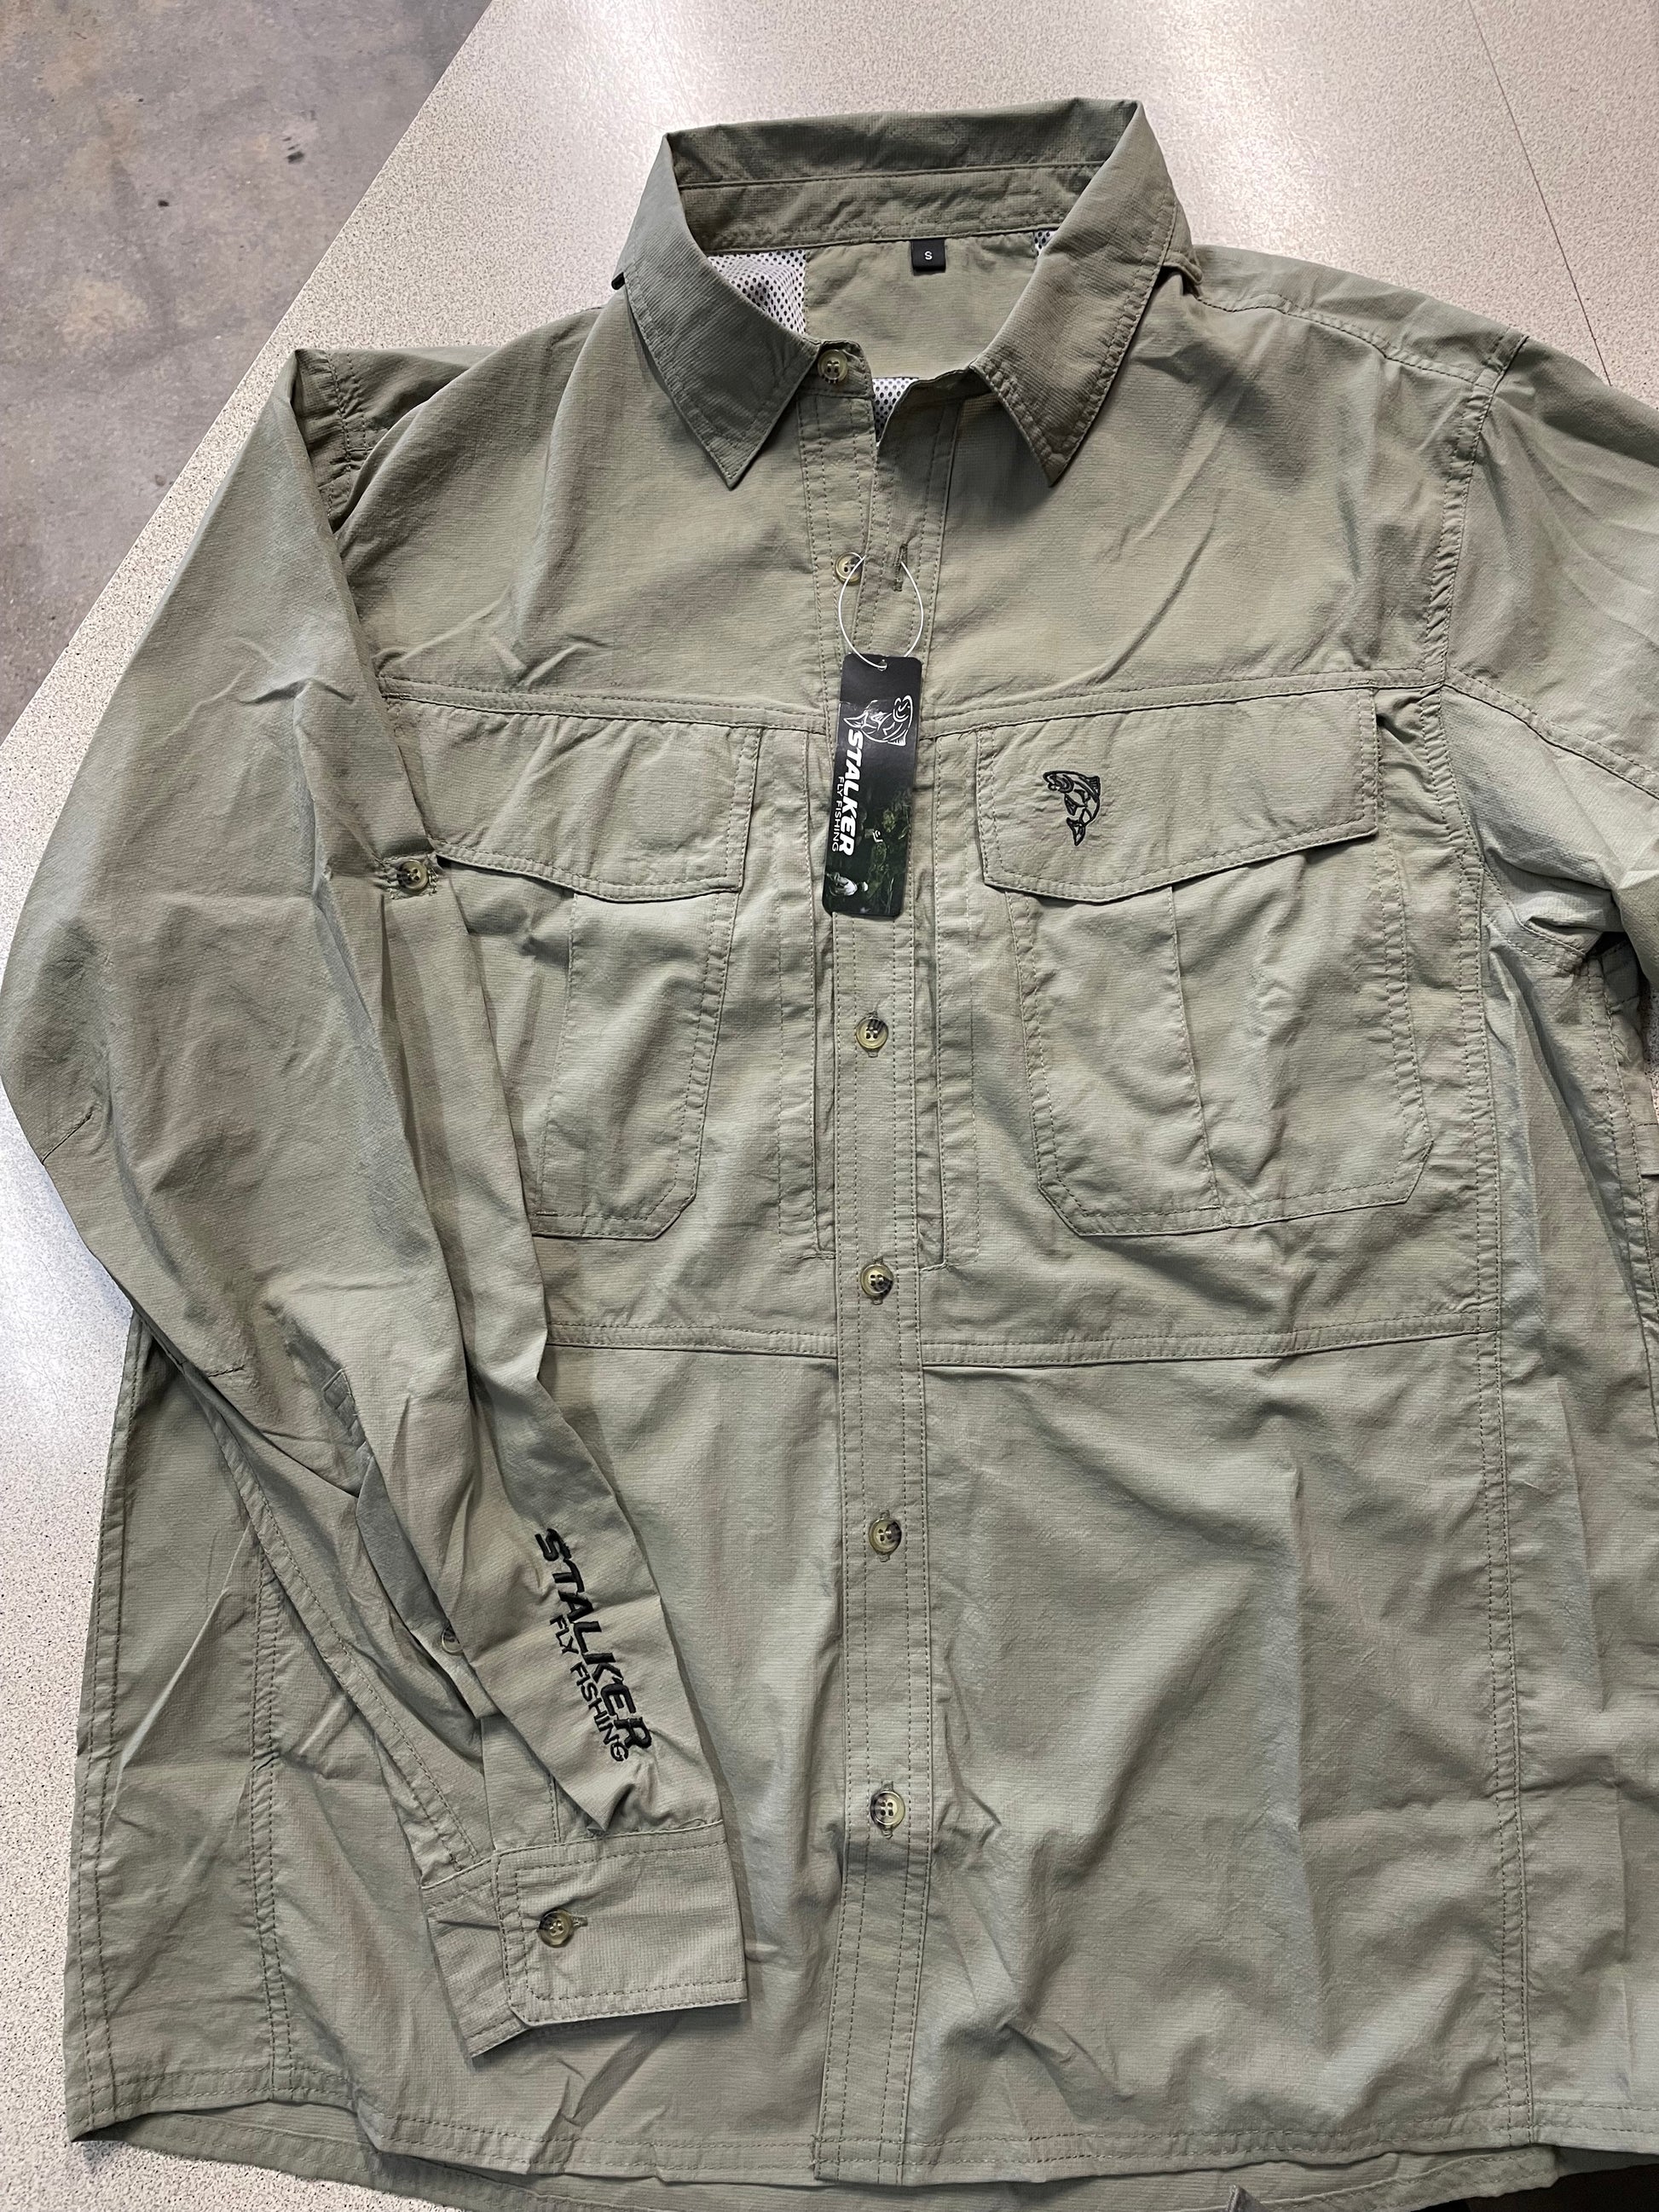 Stalker GuideSkin II Shirt - Sage – Trophy Trout Lures and Fly Fishing